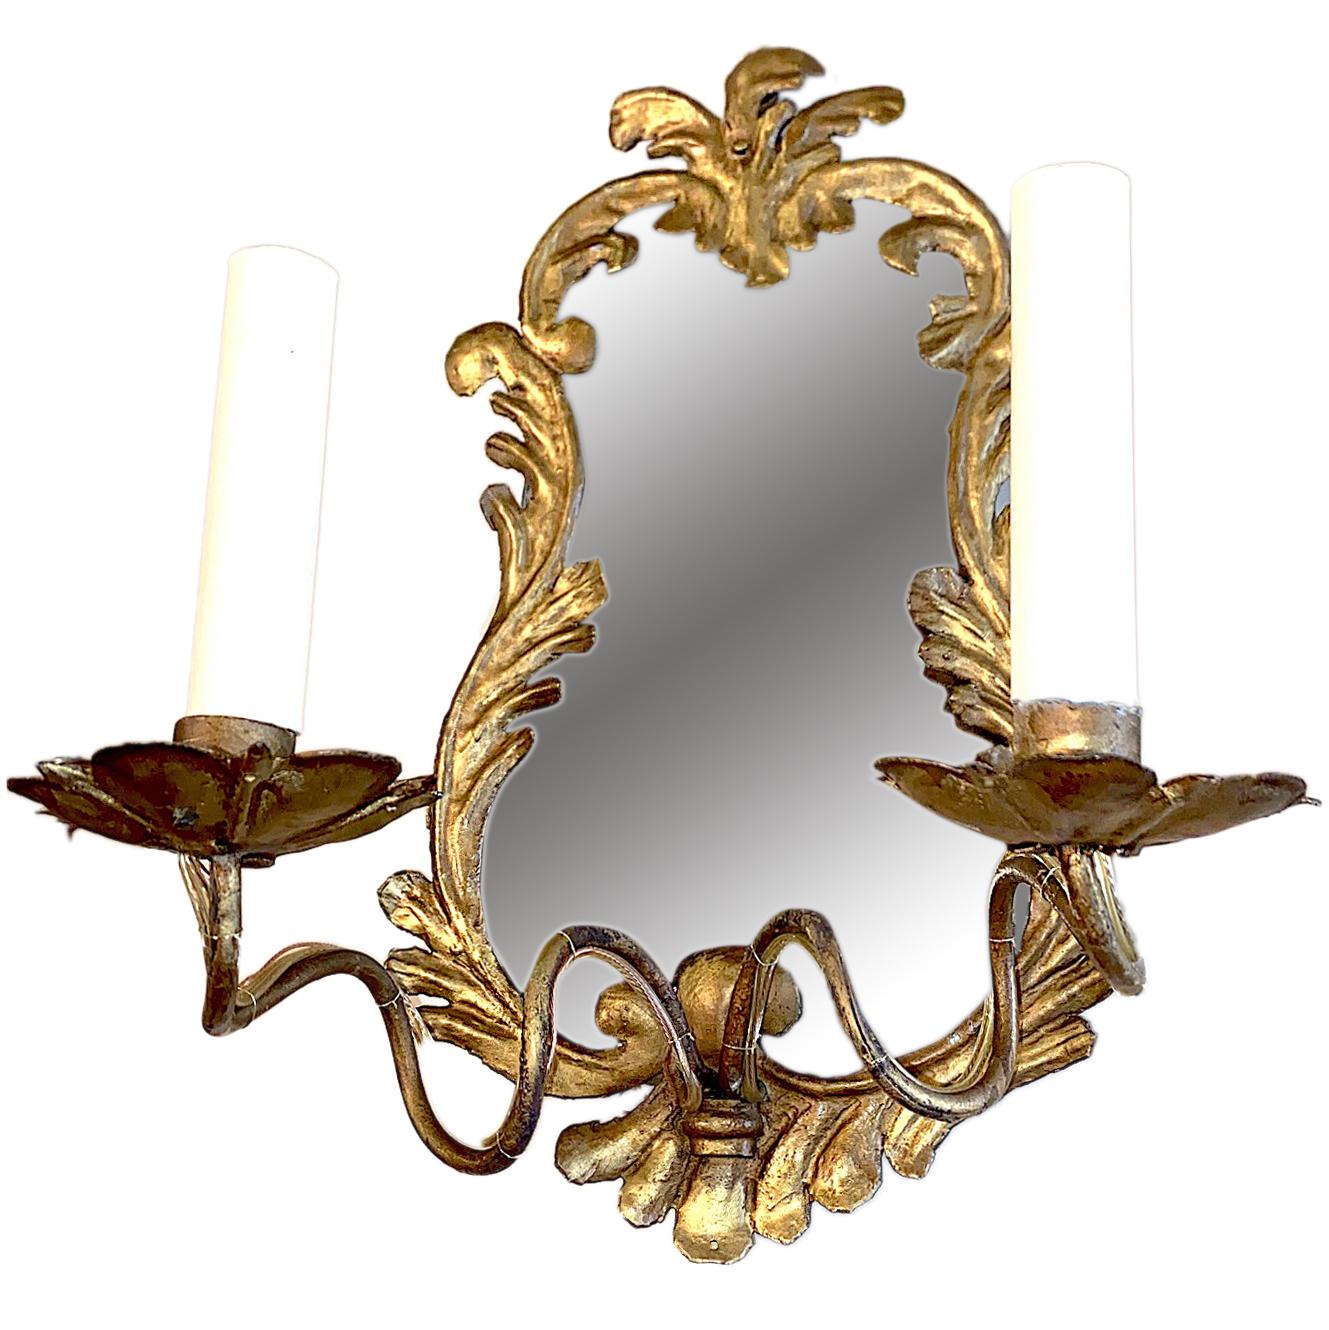 A pair of circa 1920s Venetian double light sconces with mirrored backplate.

Measurements:
Height 15.5